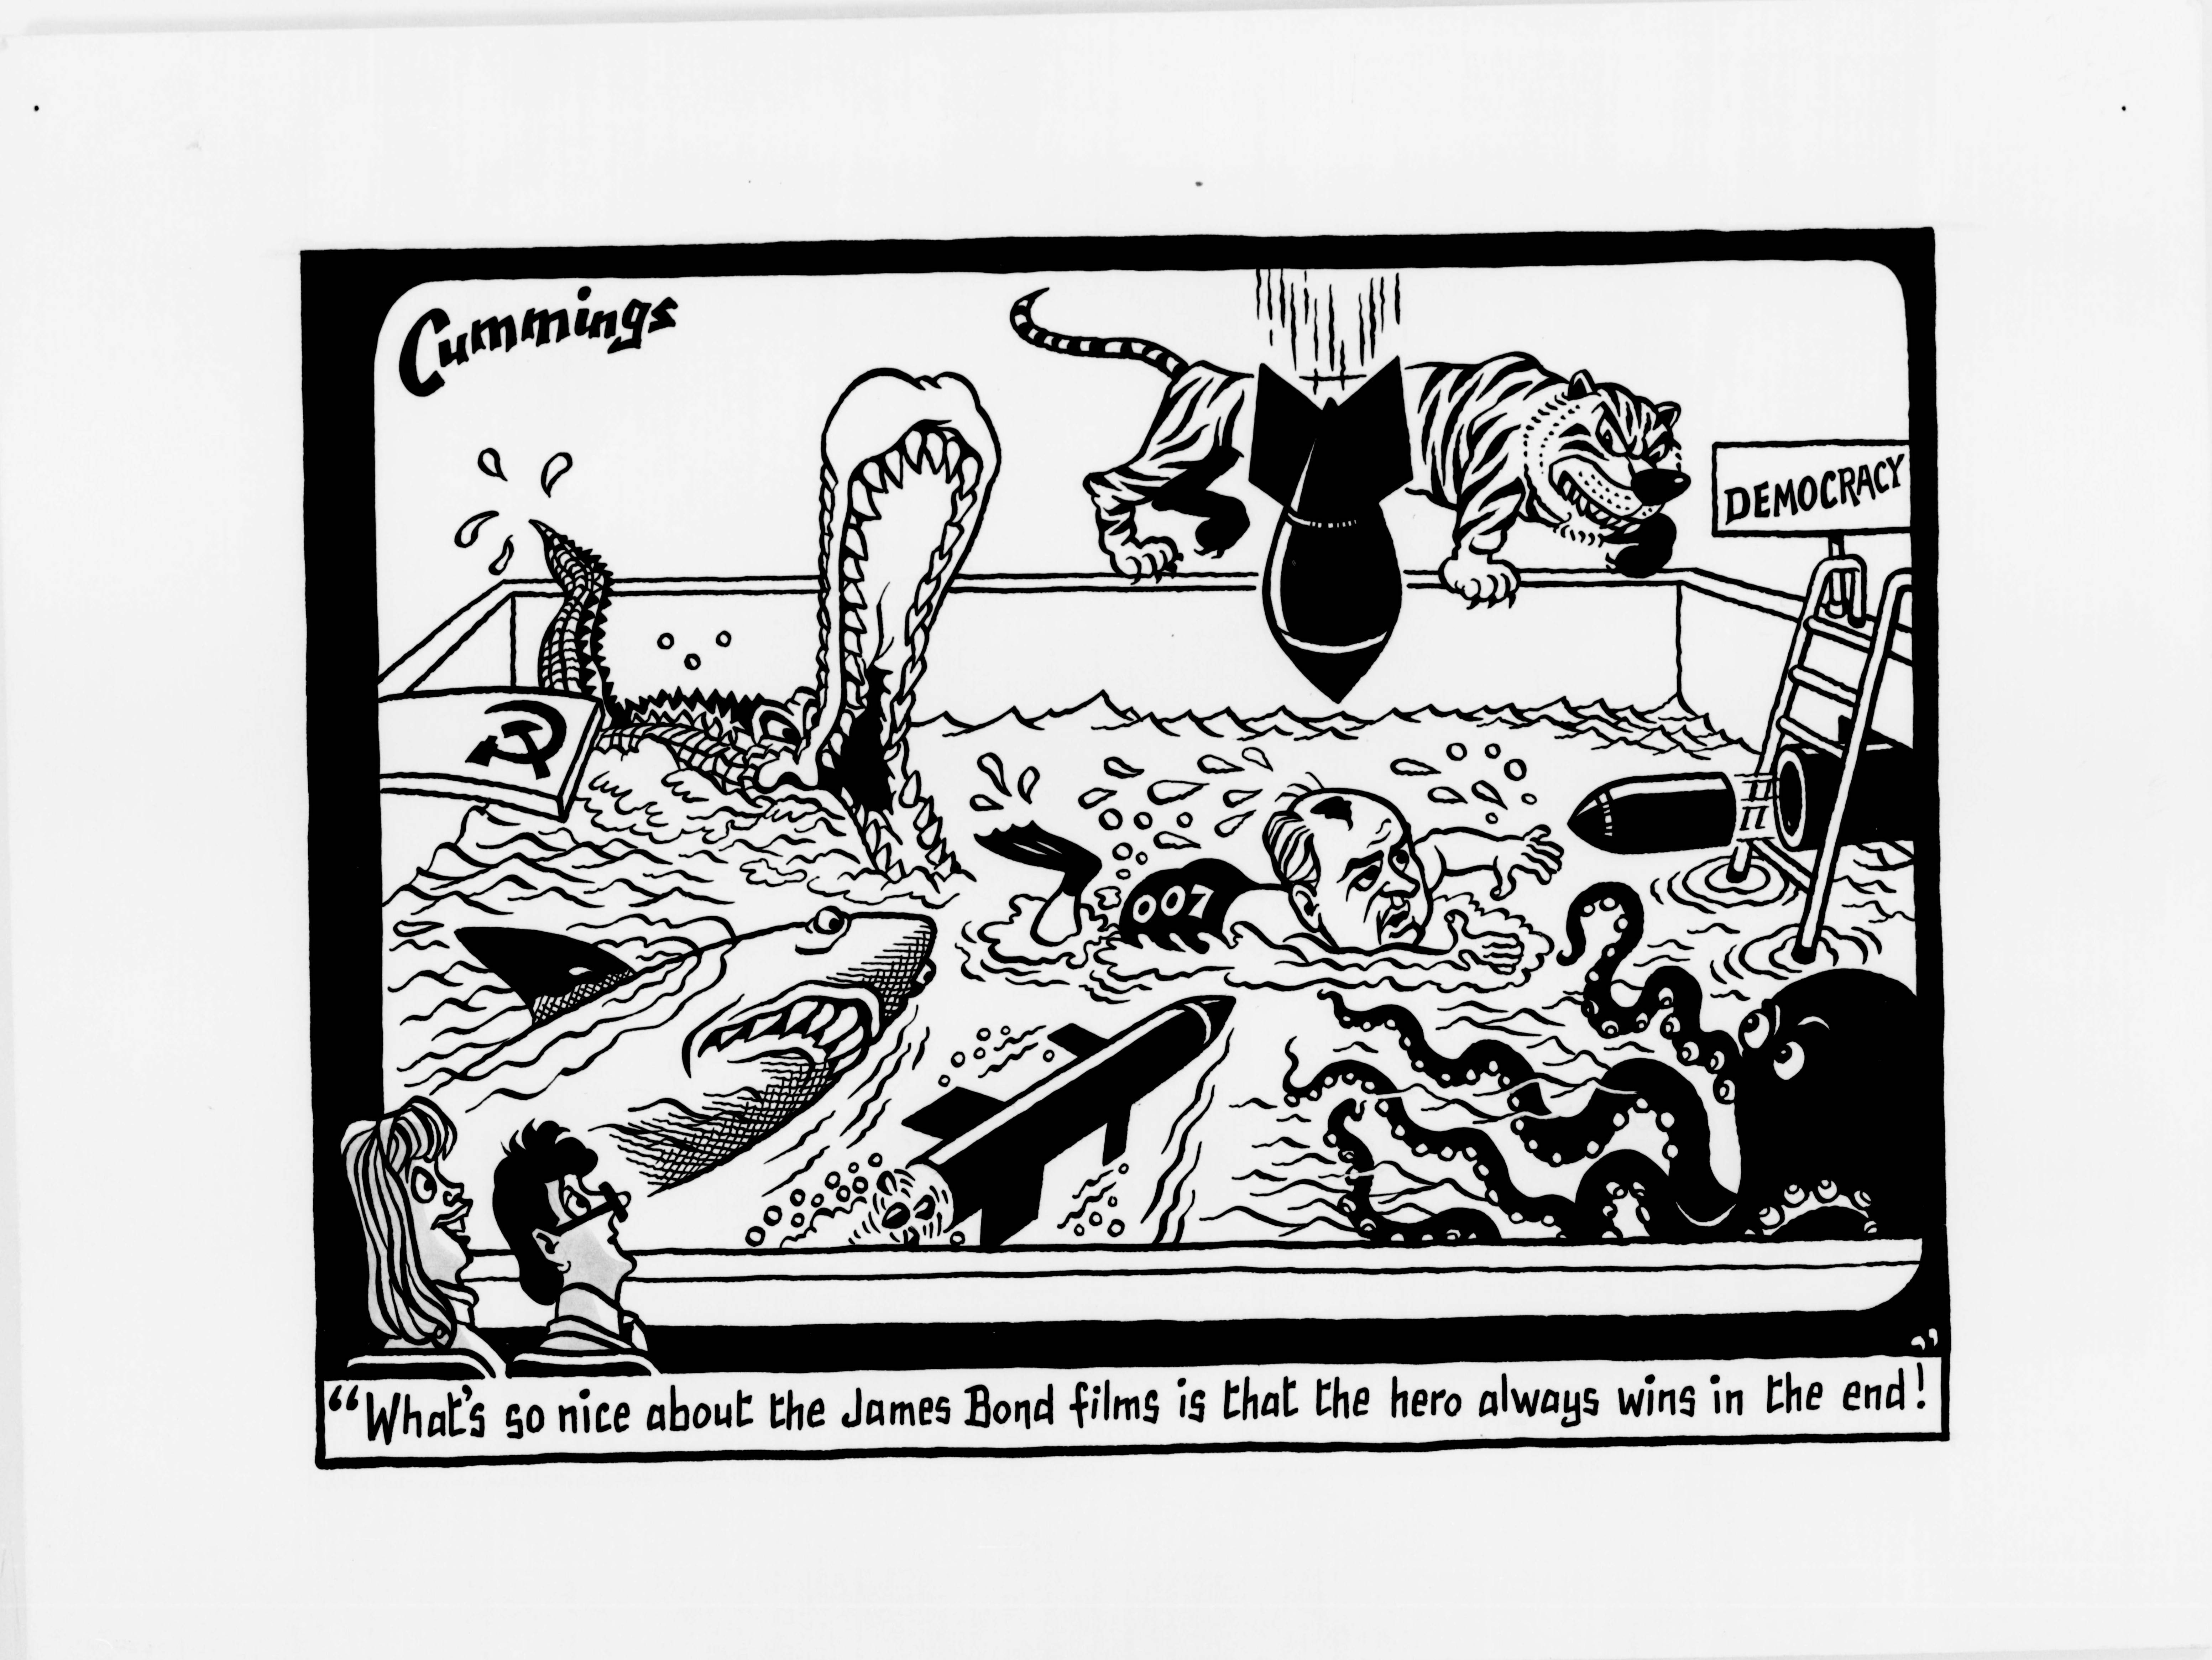 Cartoon in black and white showing a swimming pool with two people looking at the scene. In the pool a man (Mikhail Gorbachev) wearing swimming trunks labelled 007 has dived into the pool from a diving board labelled with a hammer and sickle (representing communism), and is swimming towards a ladder to get out of the pool. The ladder is labelled 'Democracy'. As he swims he is trying to avoid multiple attacks or obstacles including a crocodile with it's mouth open, a shark, a missile, a bullet coming out of a gun, an octopus, a bomb dropping from the sky, and a tiger prowling around the edge of the pool.